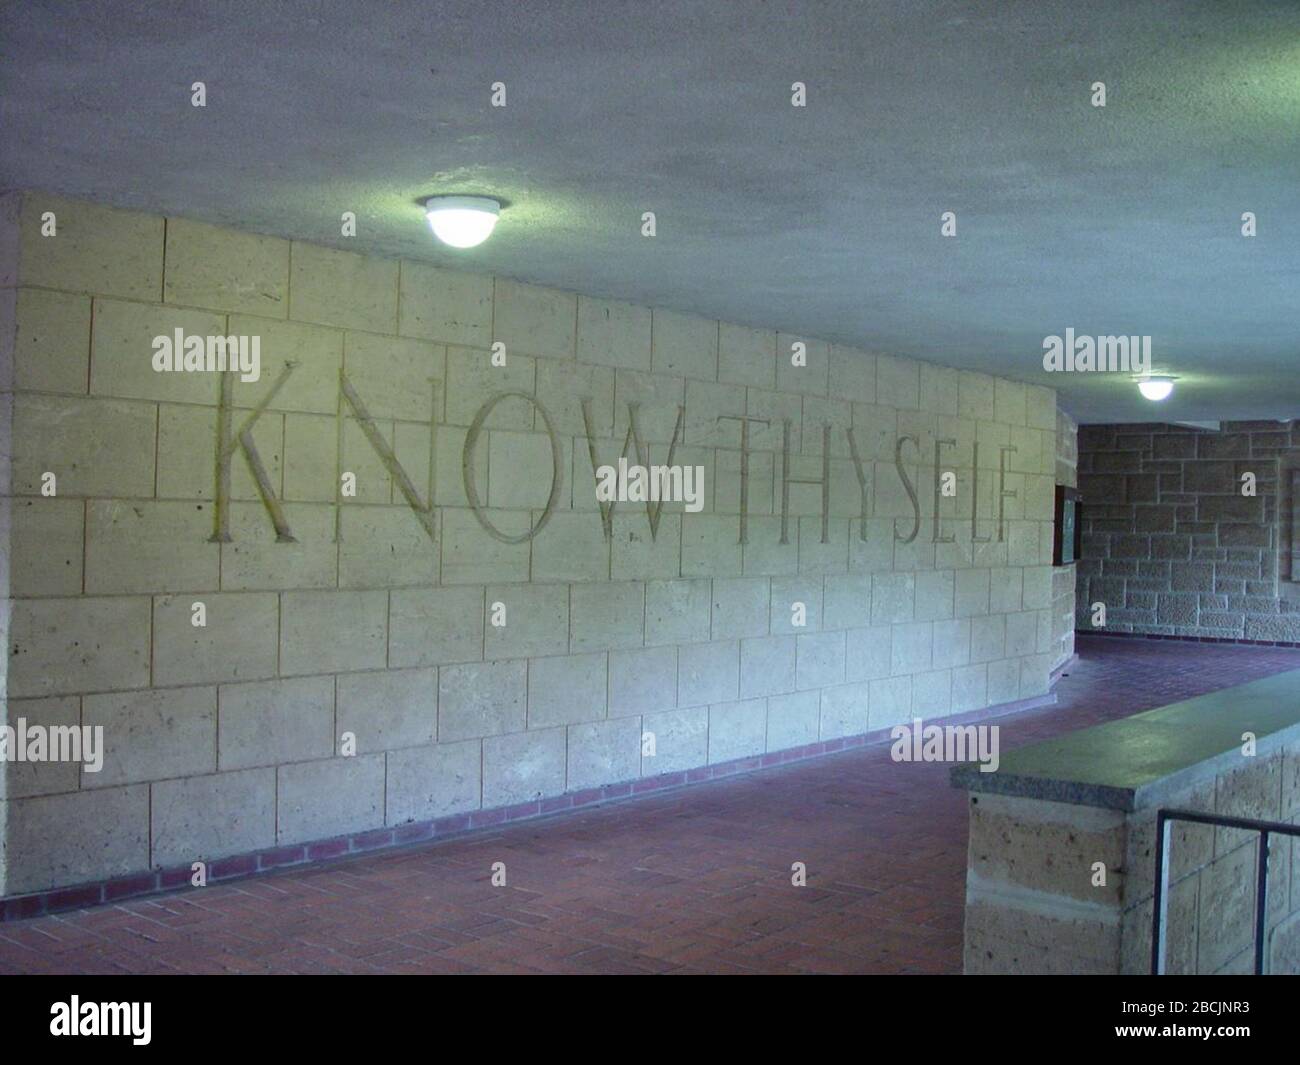 'English:  Image title: Lettering know thyself Image from Public domain images website, http://www.public-domain-image.com/full-image/architecture-public-domain-images-pictures/walls-public-domain-images-pictures/lettering-know-thyself.jpg.html; Not given  Transferred by Fæ on 2013-02-27; http://www.public-domain-image.com/public-domain-images-pictures-free-stock-photos/architecture-public-domain-images-pictures/walls-public-domain-images-pictures/lettering-know-thyself.jpg; Leon Brooks; ' Stock Photo